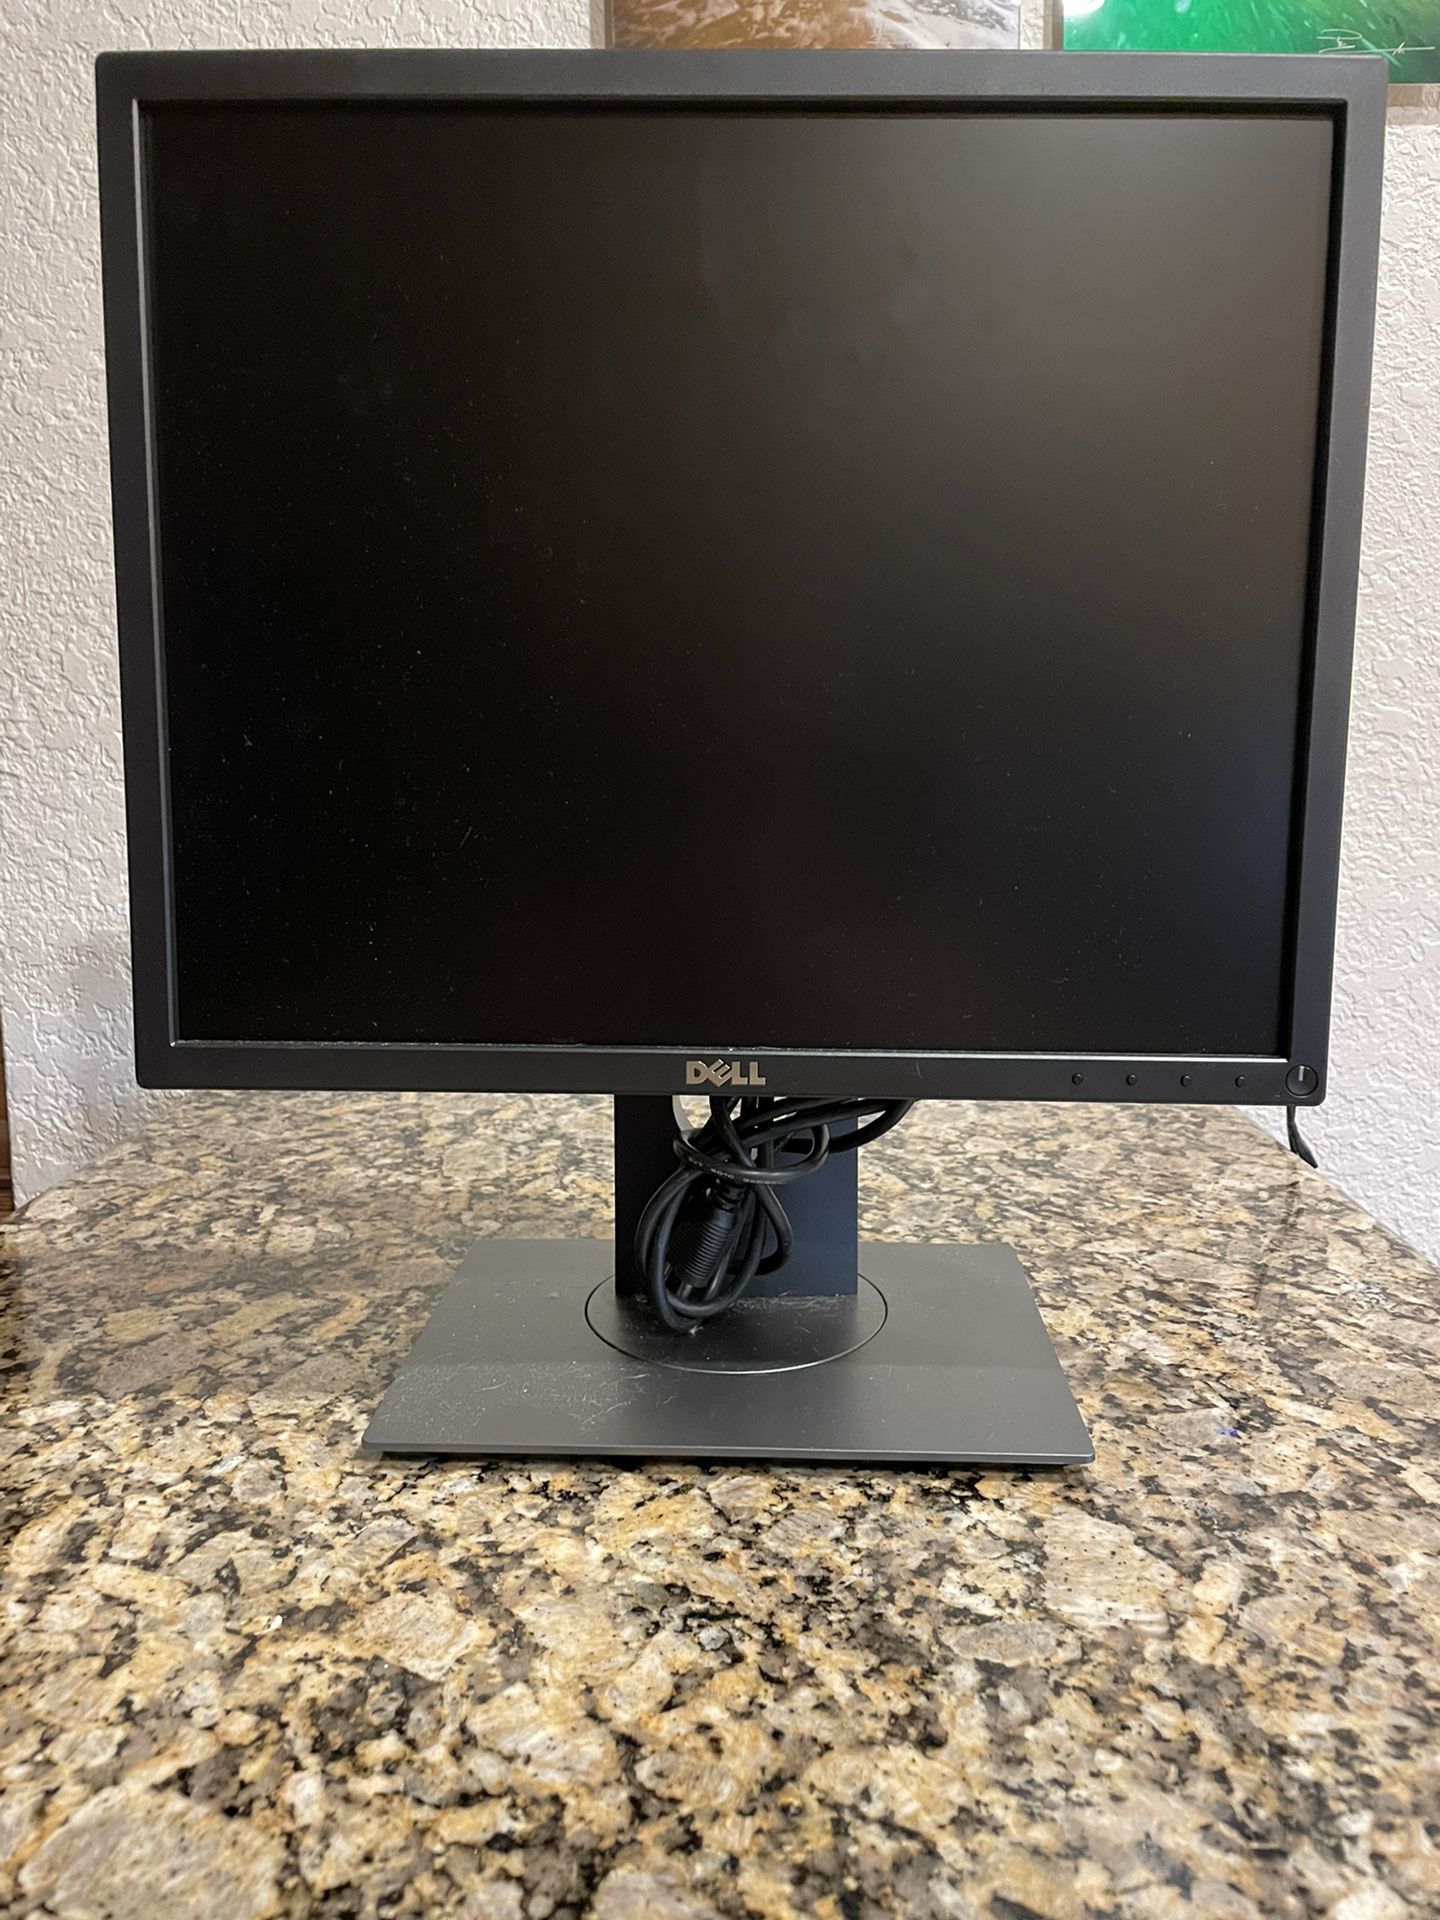 Dell Monitors - 19”, 23”, 23”. $50 each or all 3 for $125